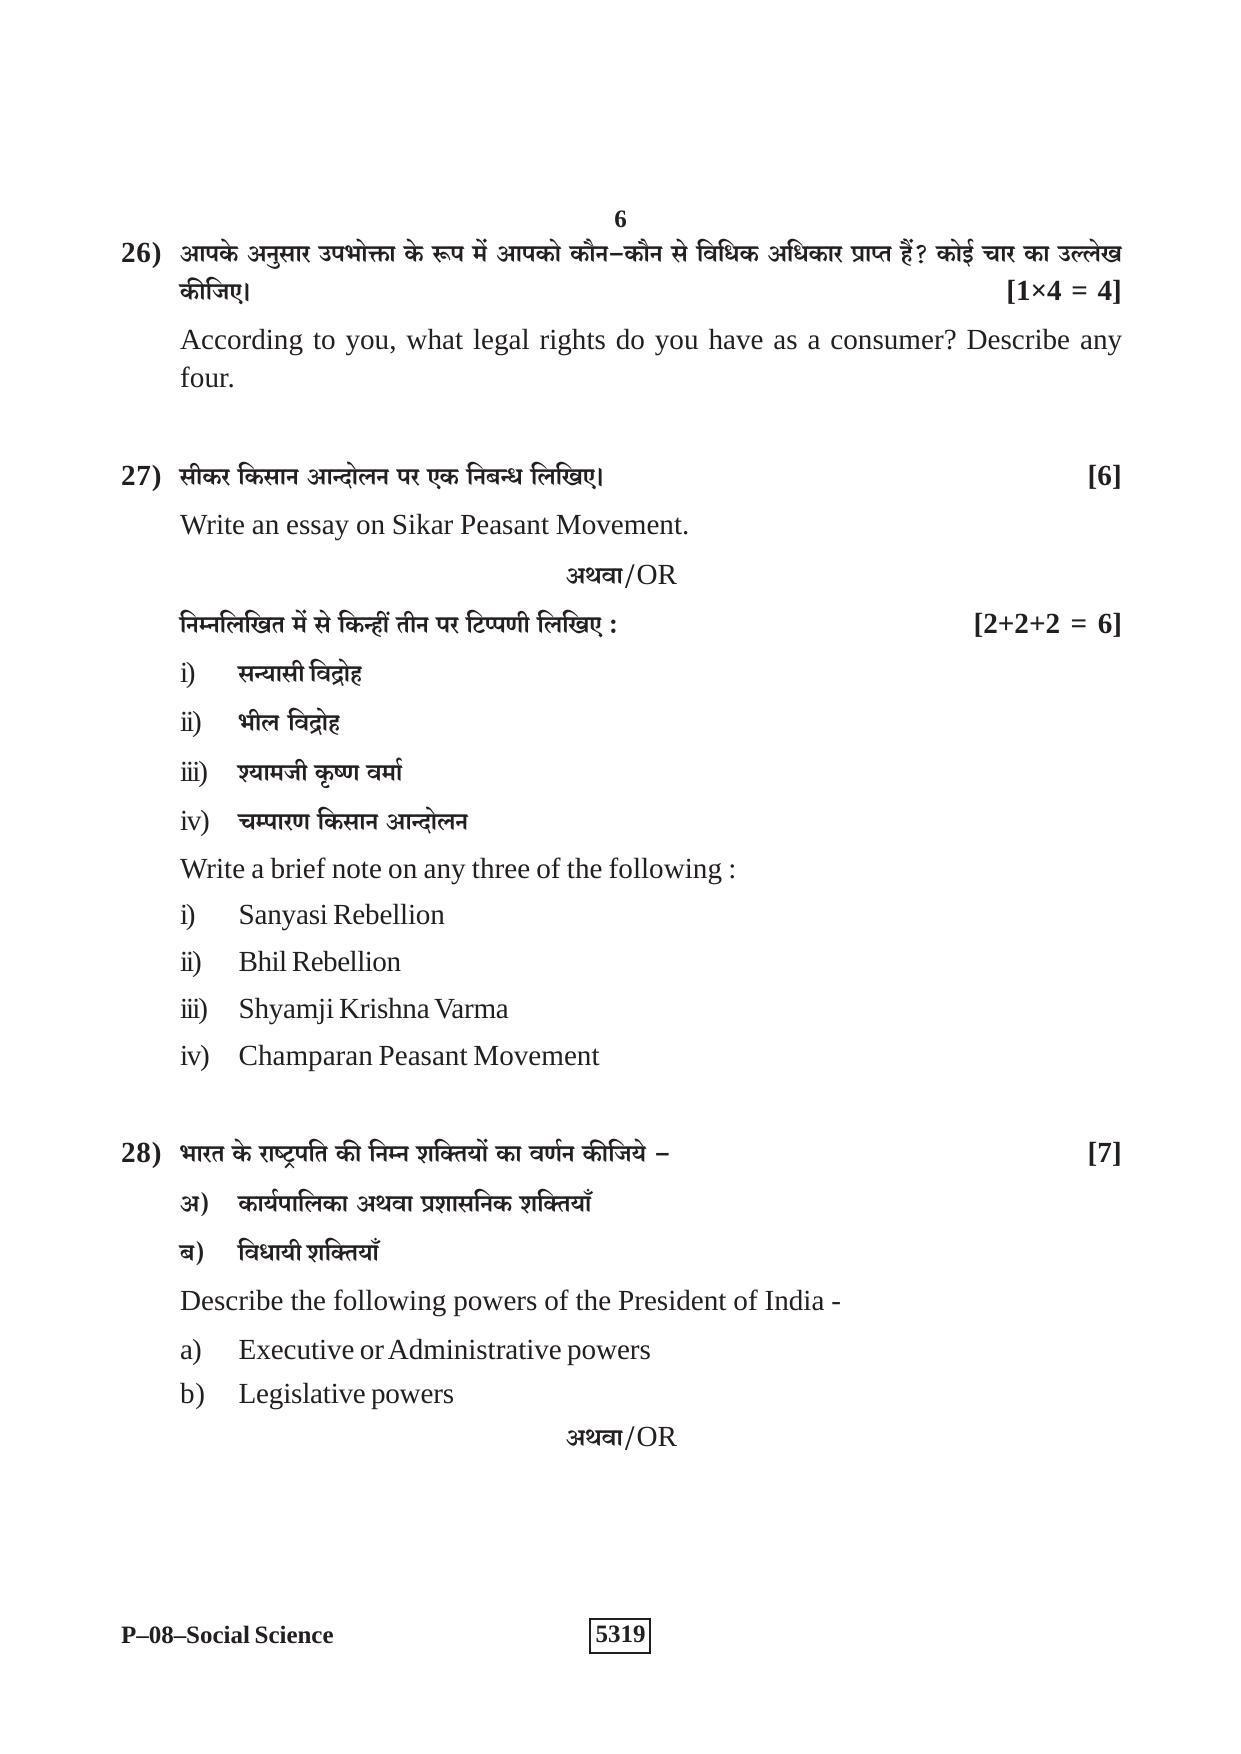 RBSE 2020 Social Science Praveshika Question Paper - Page 6